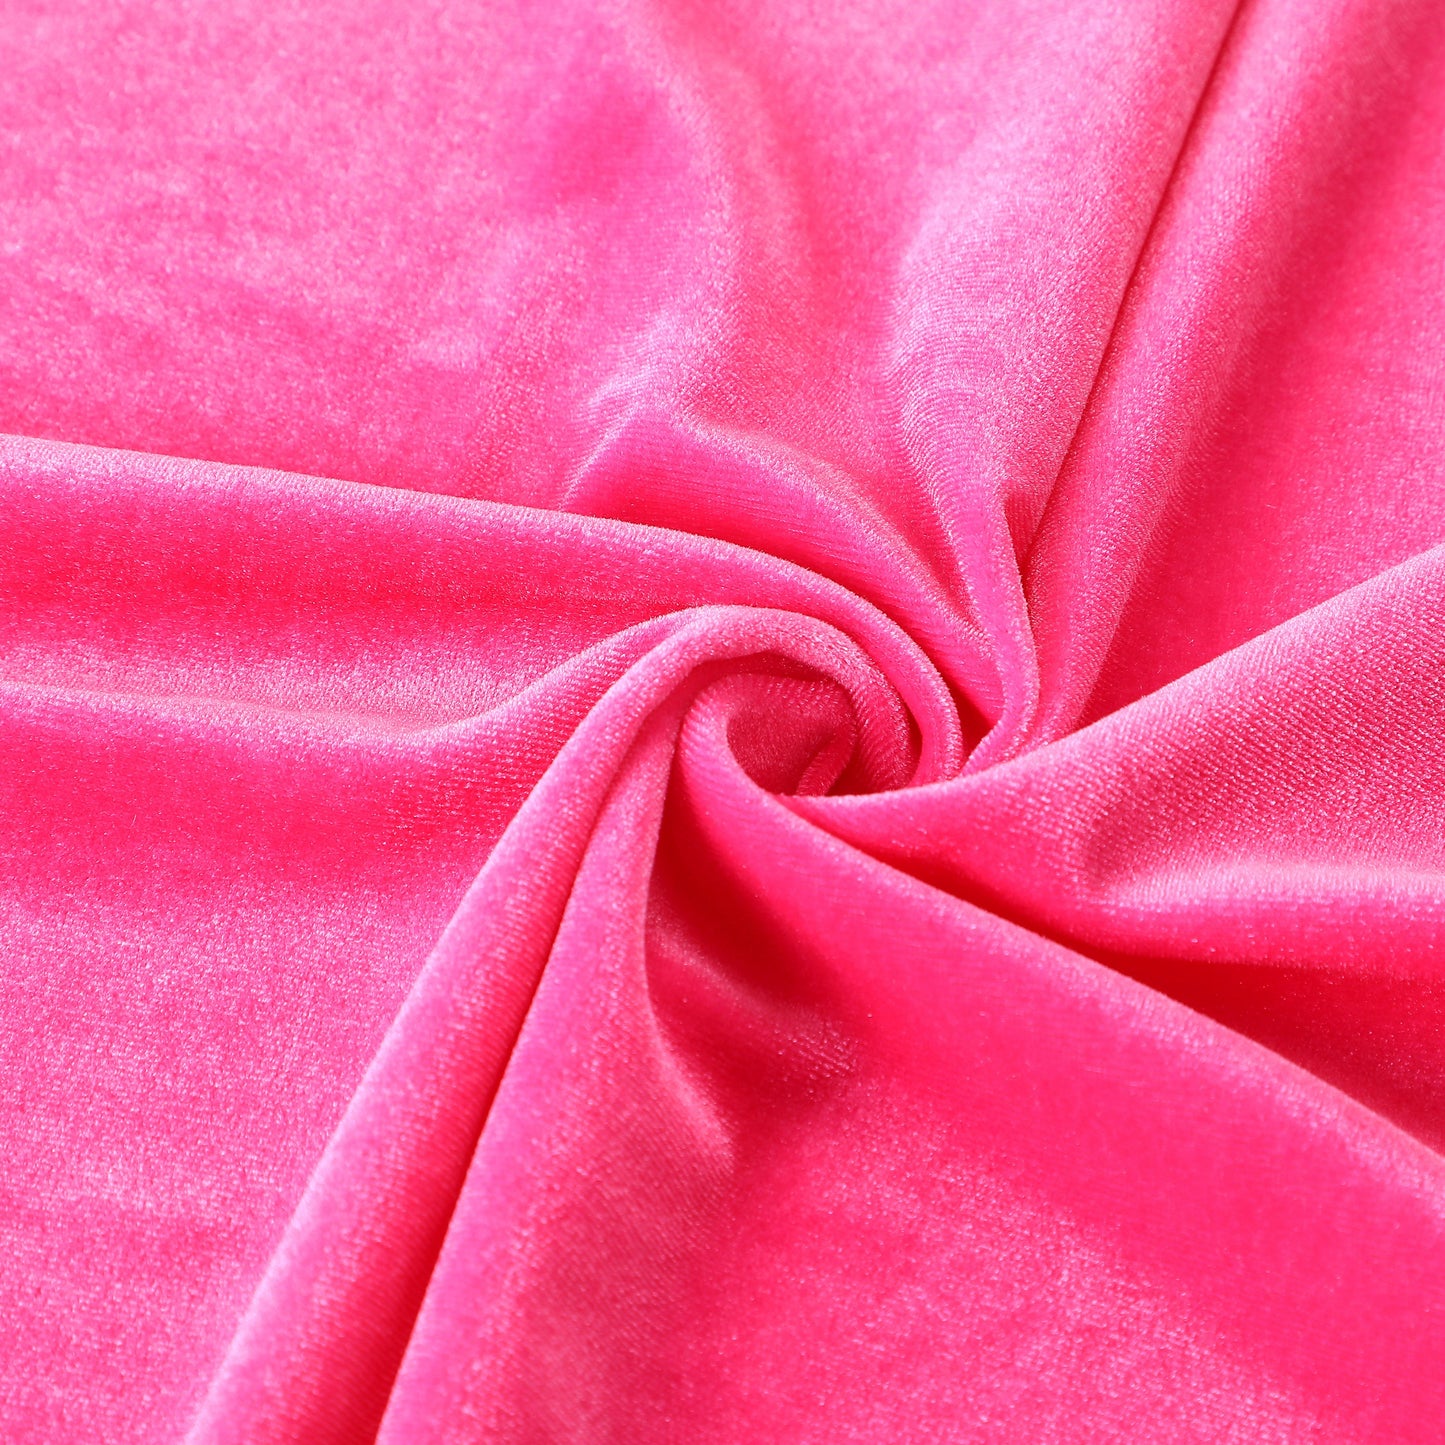 Raspberry Stretchy Velvet Fabric by The Yard Stretch Fabrics Polyester Spandex for Scrunchies Clothes Costumes Crafts Bows